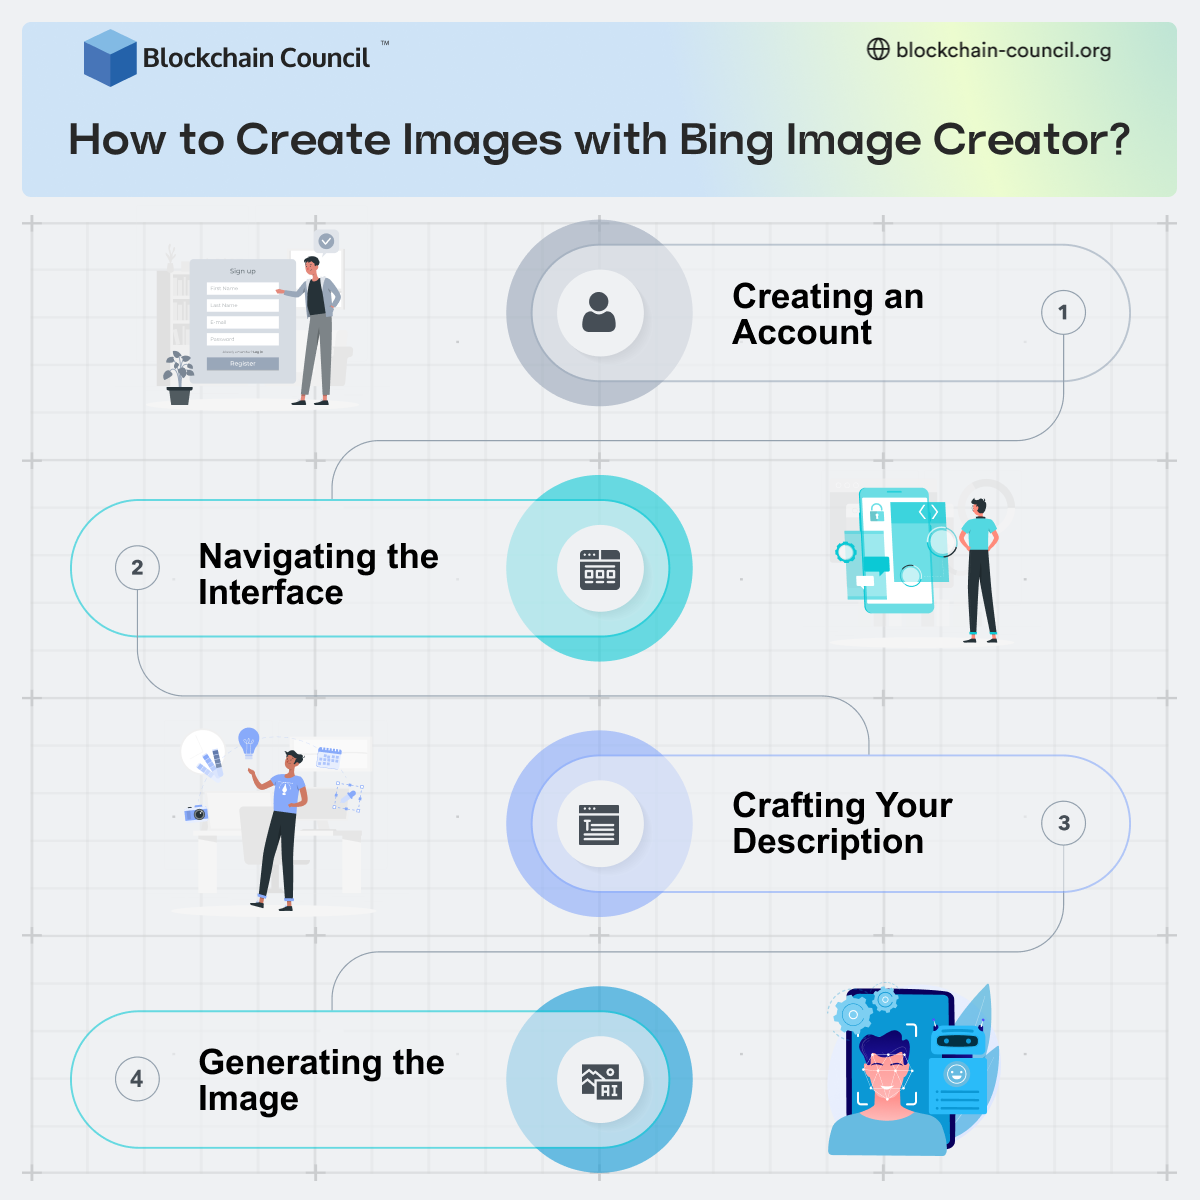 How to Create Images with Bing Image Creator